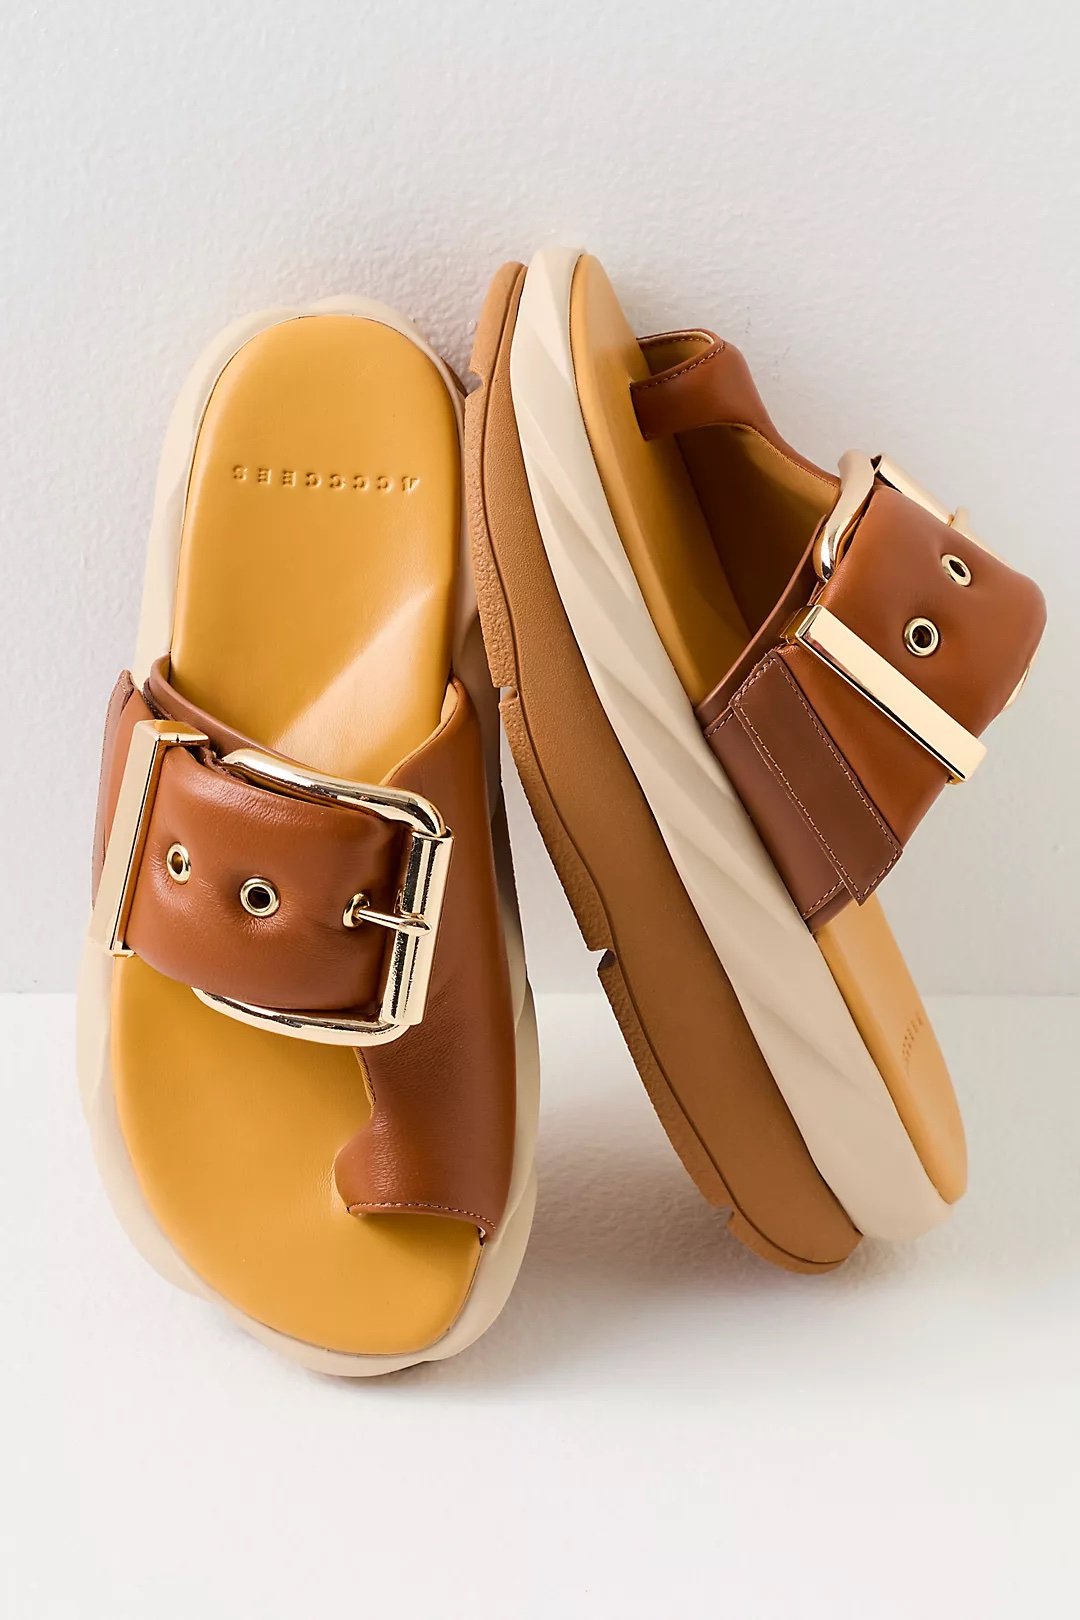 Add To Cart Buckle Sandals